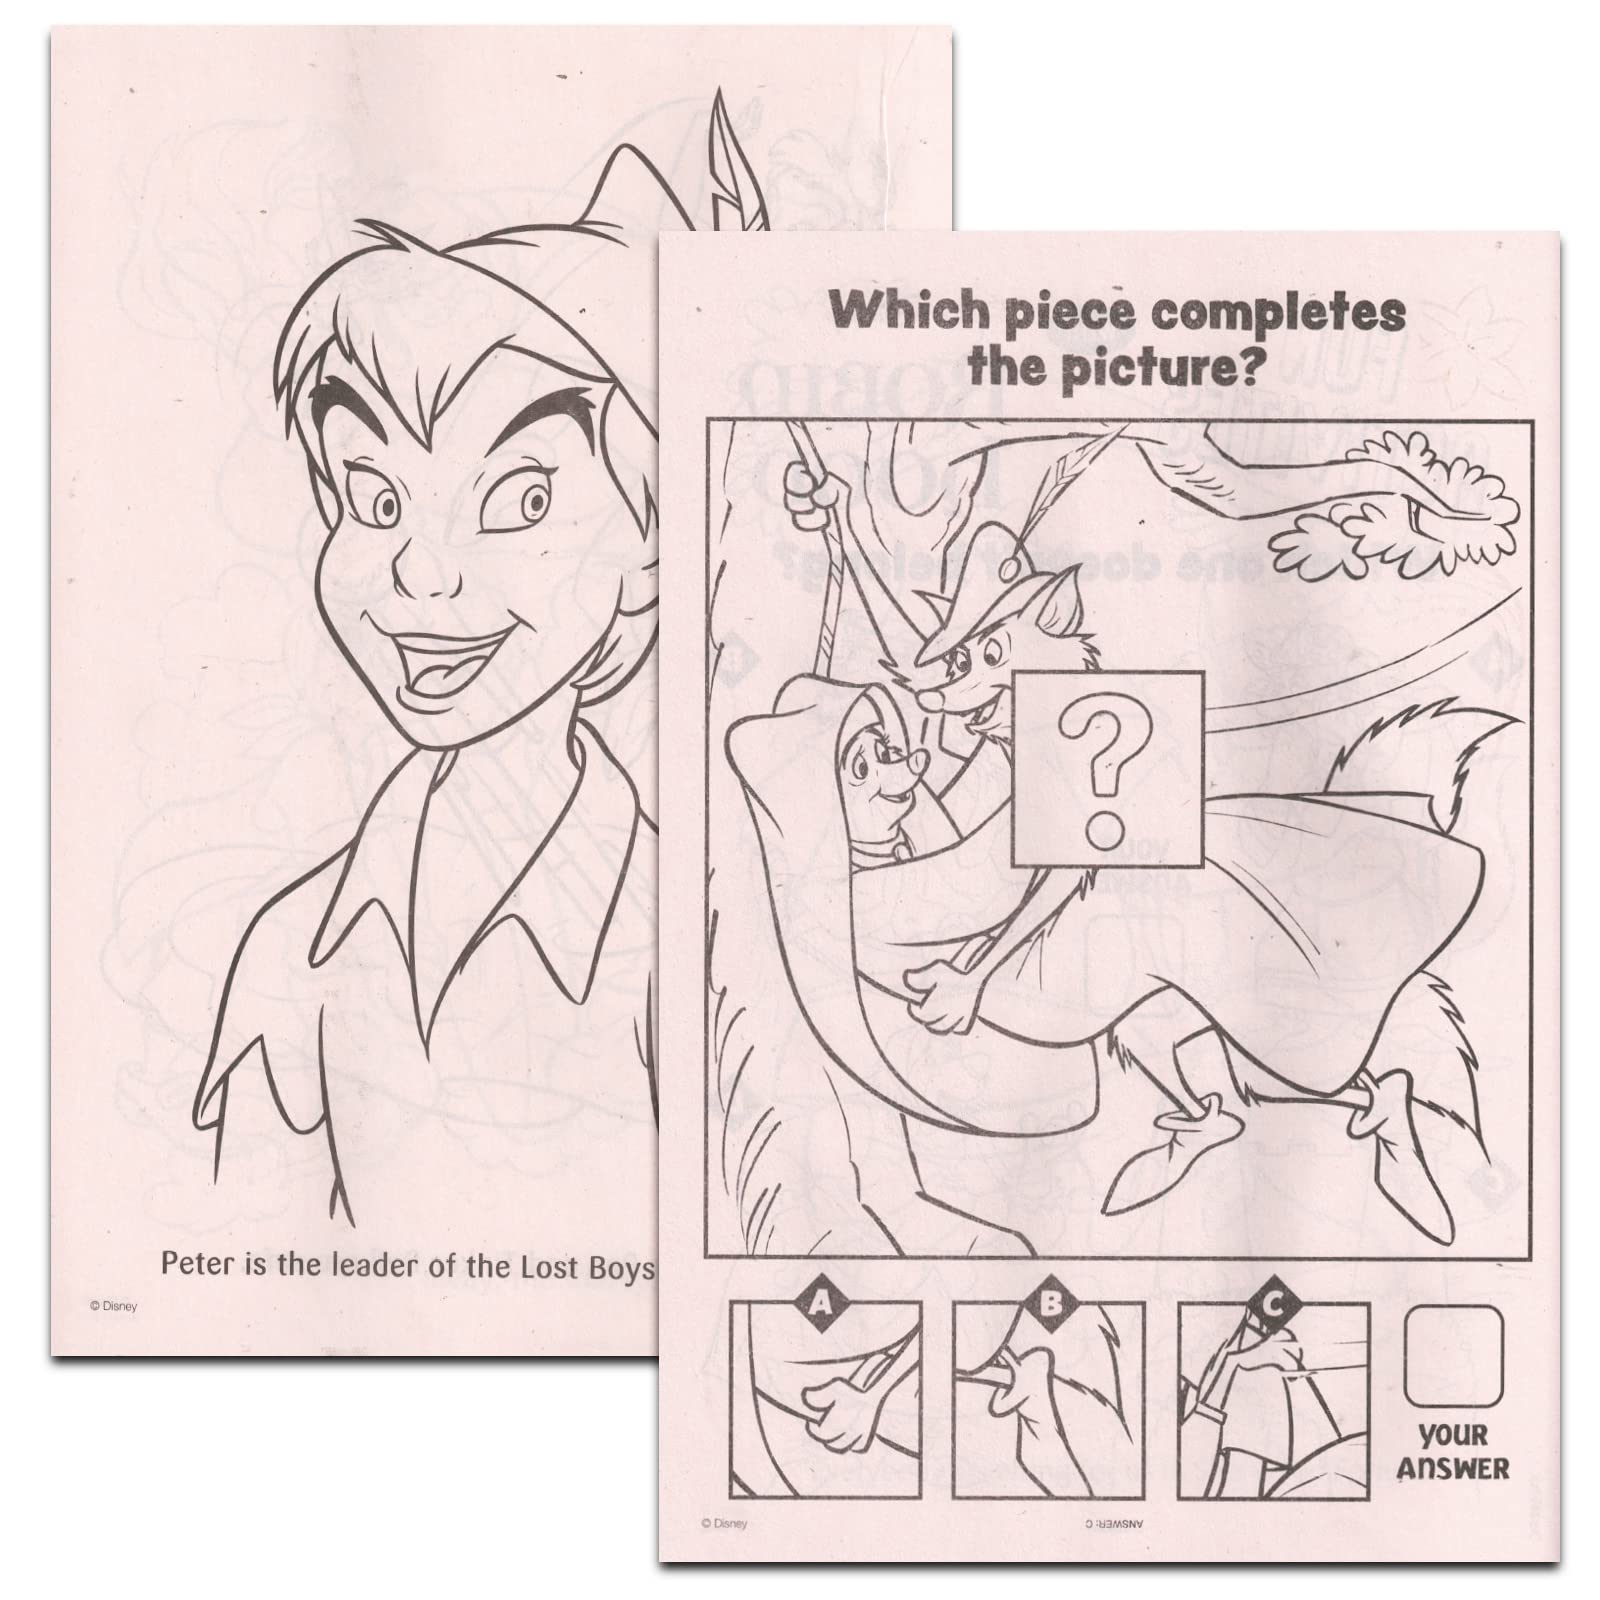 Disney robin hood coloring and activity book set for kids